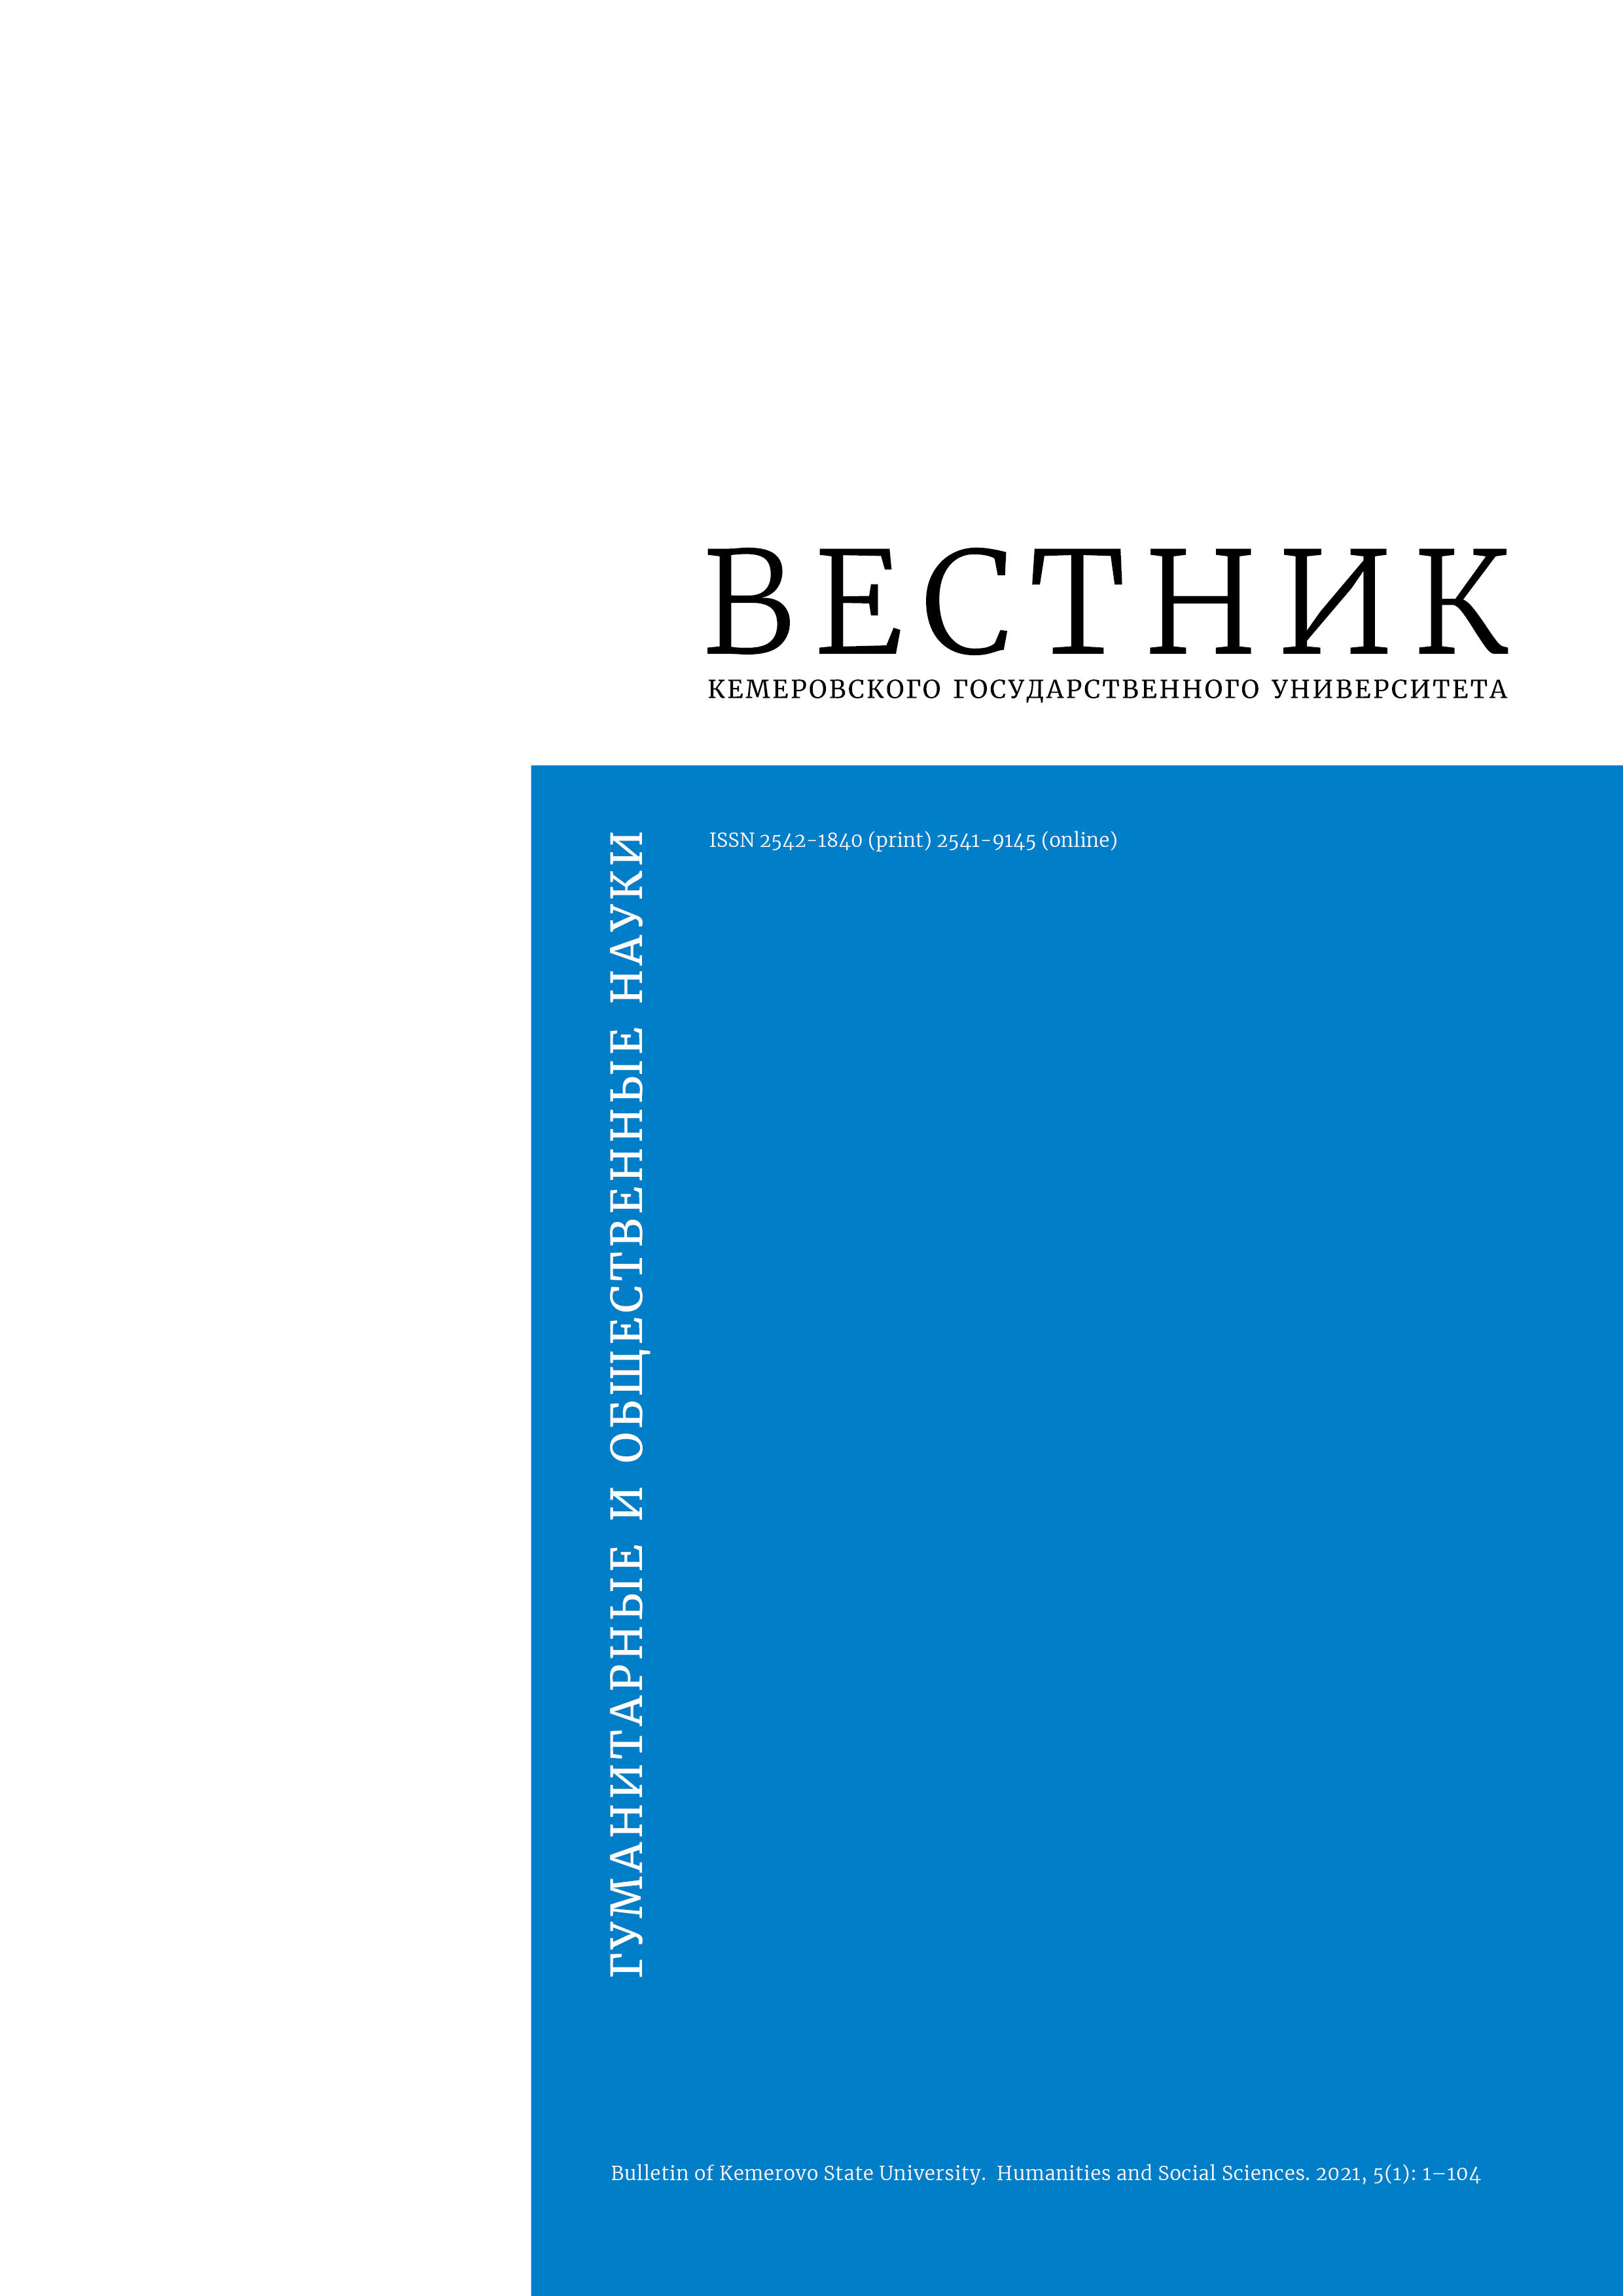                         Legal Framework for Regulating Physical Education and Sports in Kuzbass (1985–2008)
            